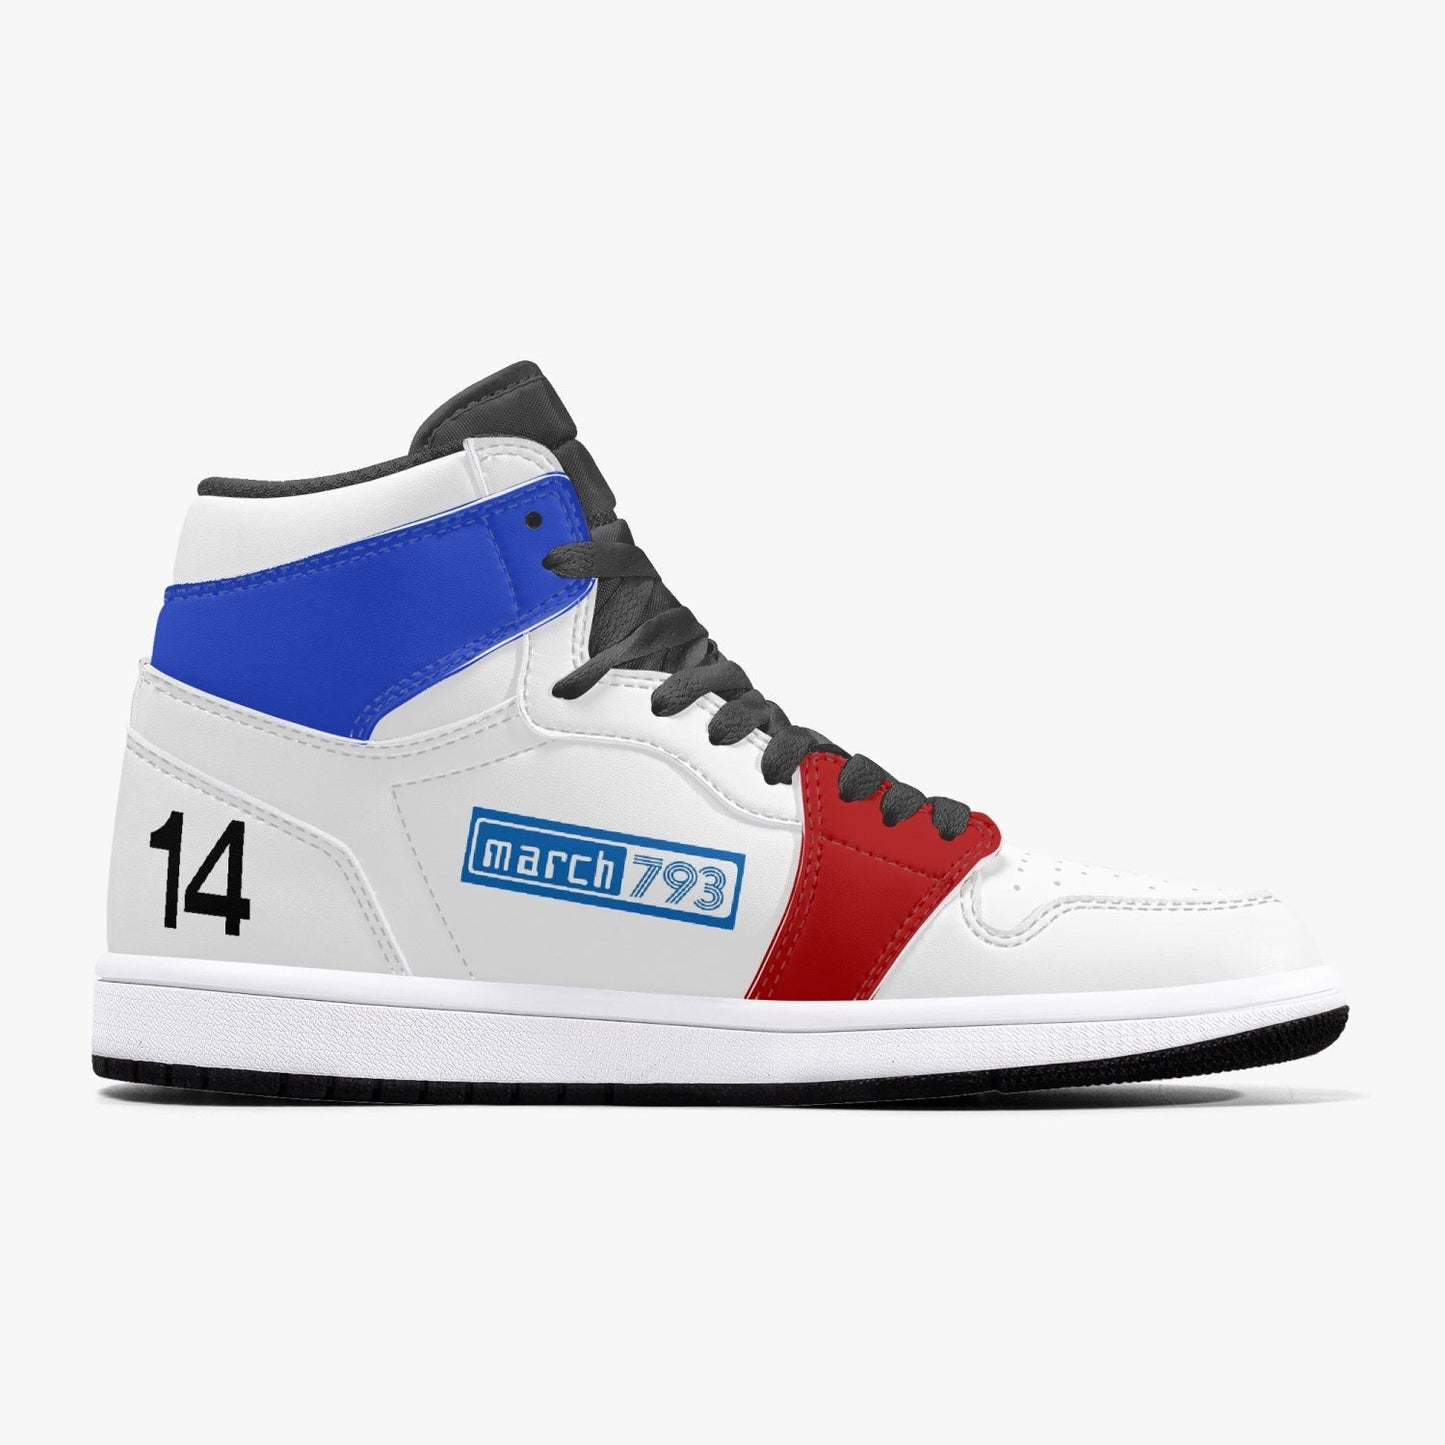 Steve Willing F2 MARCH High-Top Leather Sneakers - carbon trim